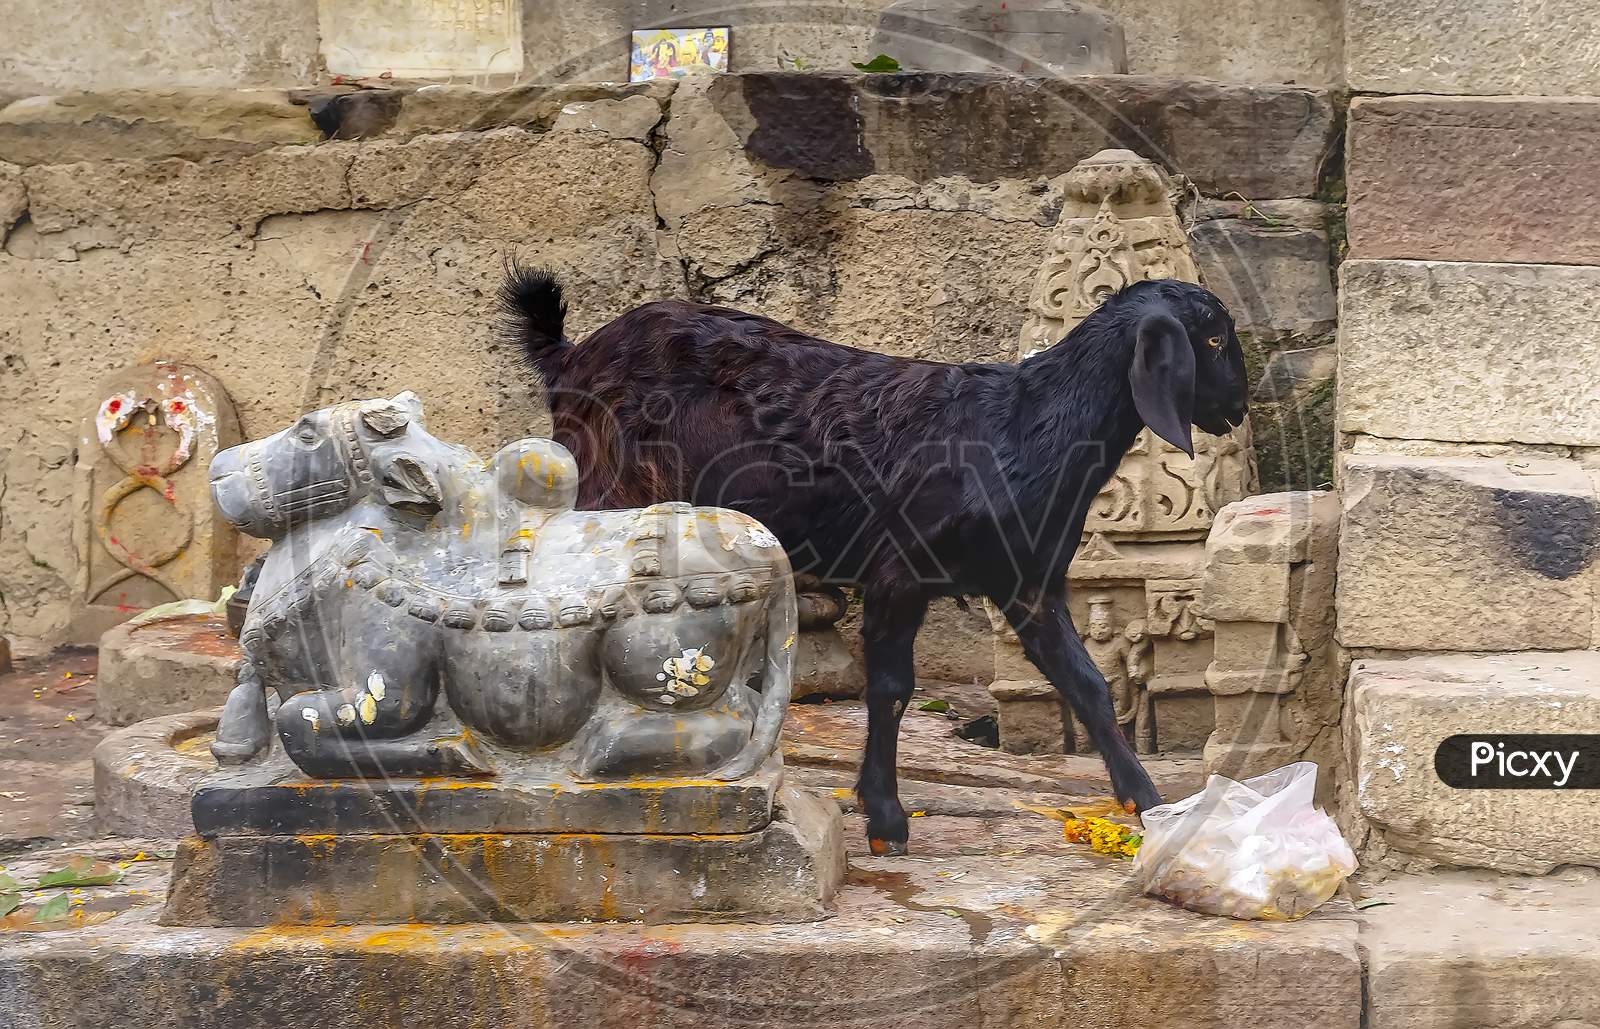 A cheeky goat eat the flower offerings to the holy cow on the banks of the holy river Ganges.